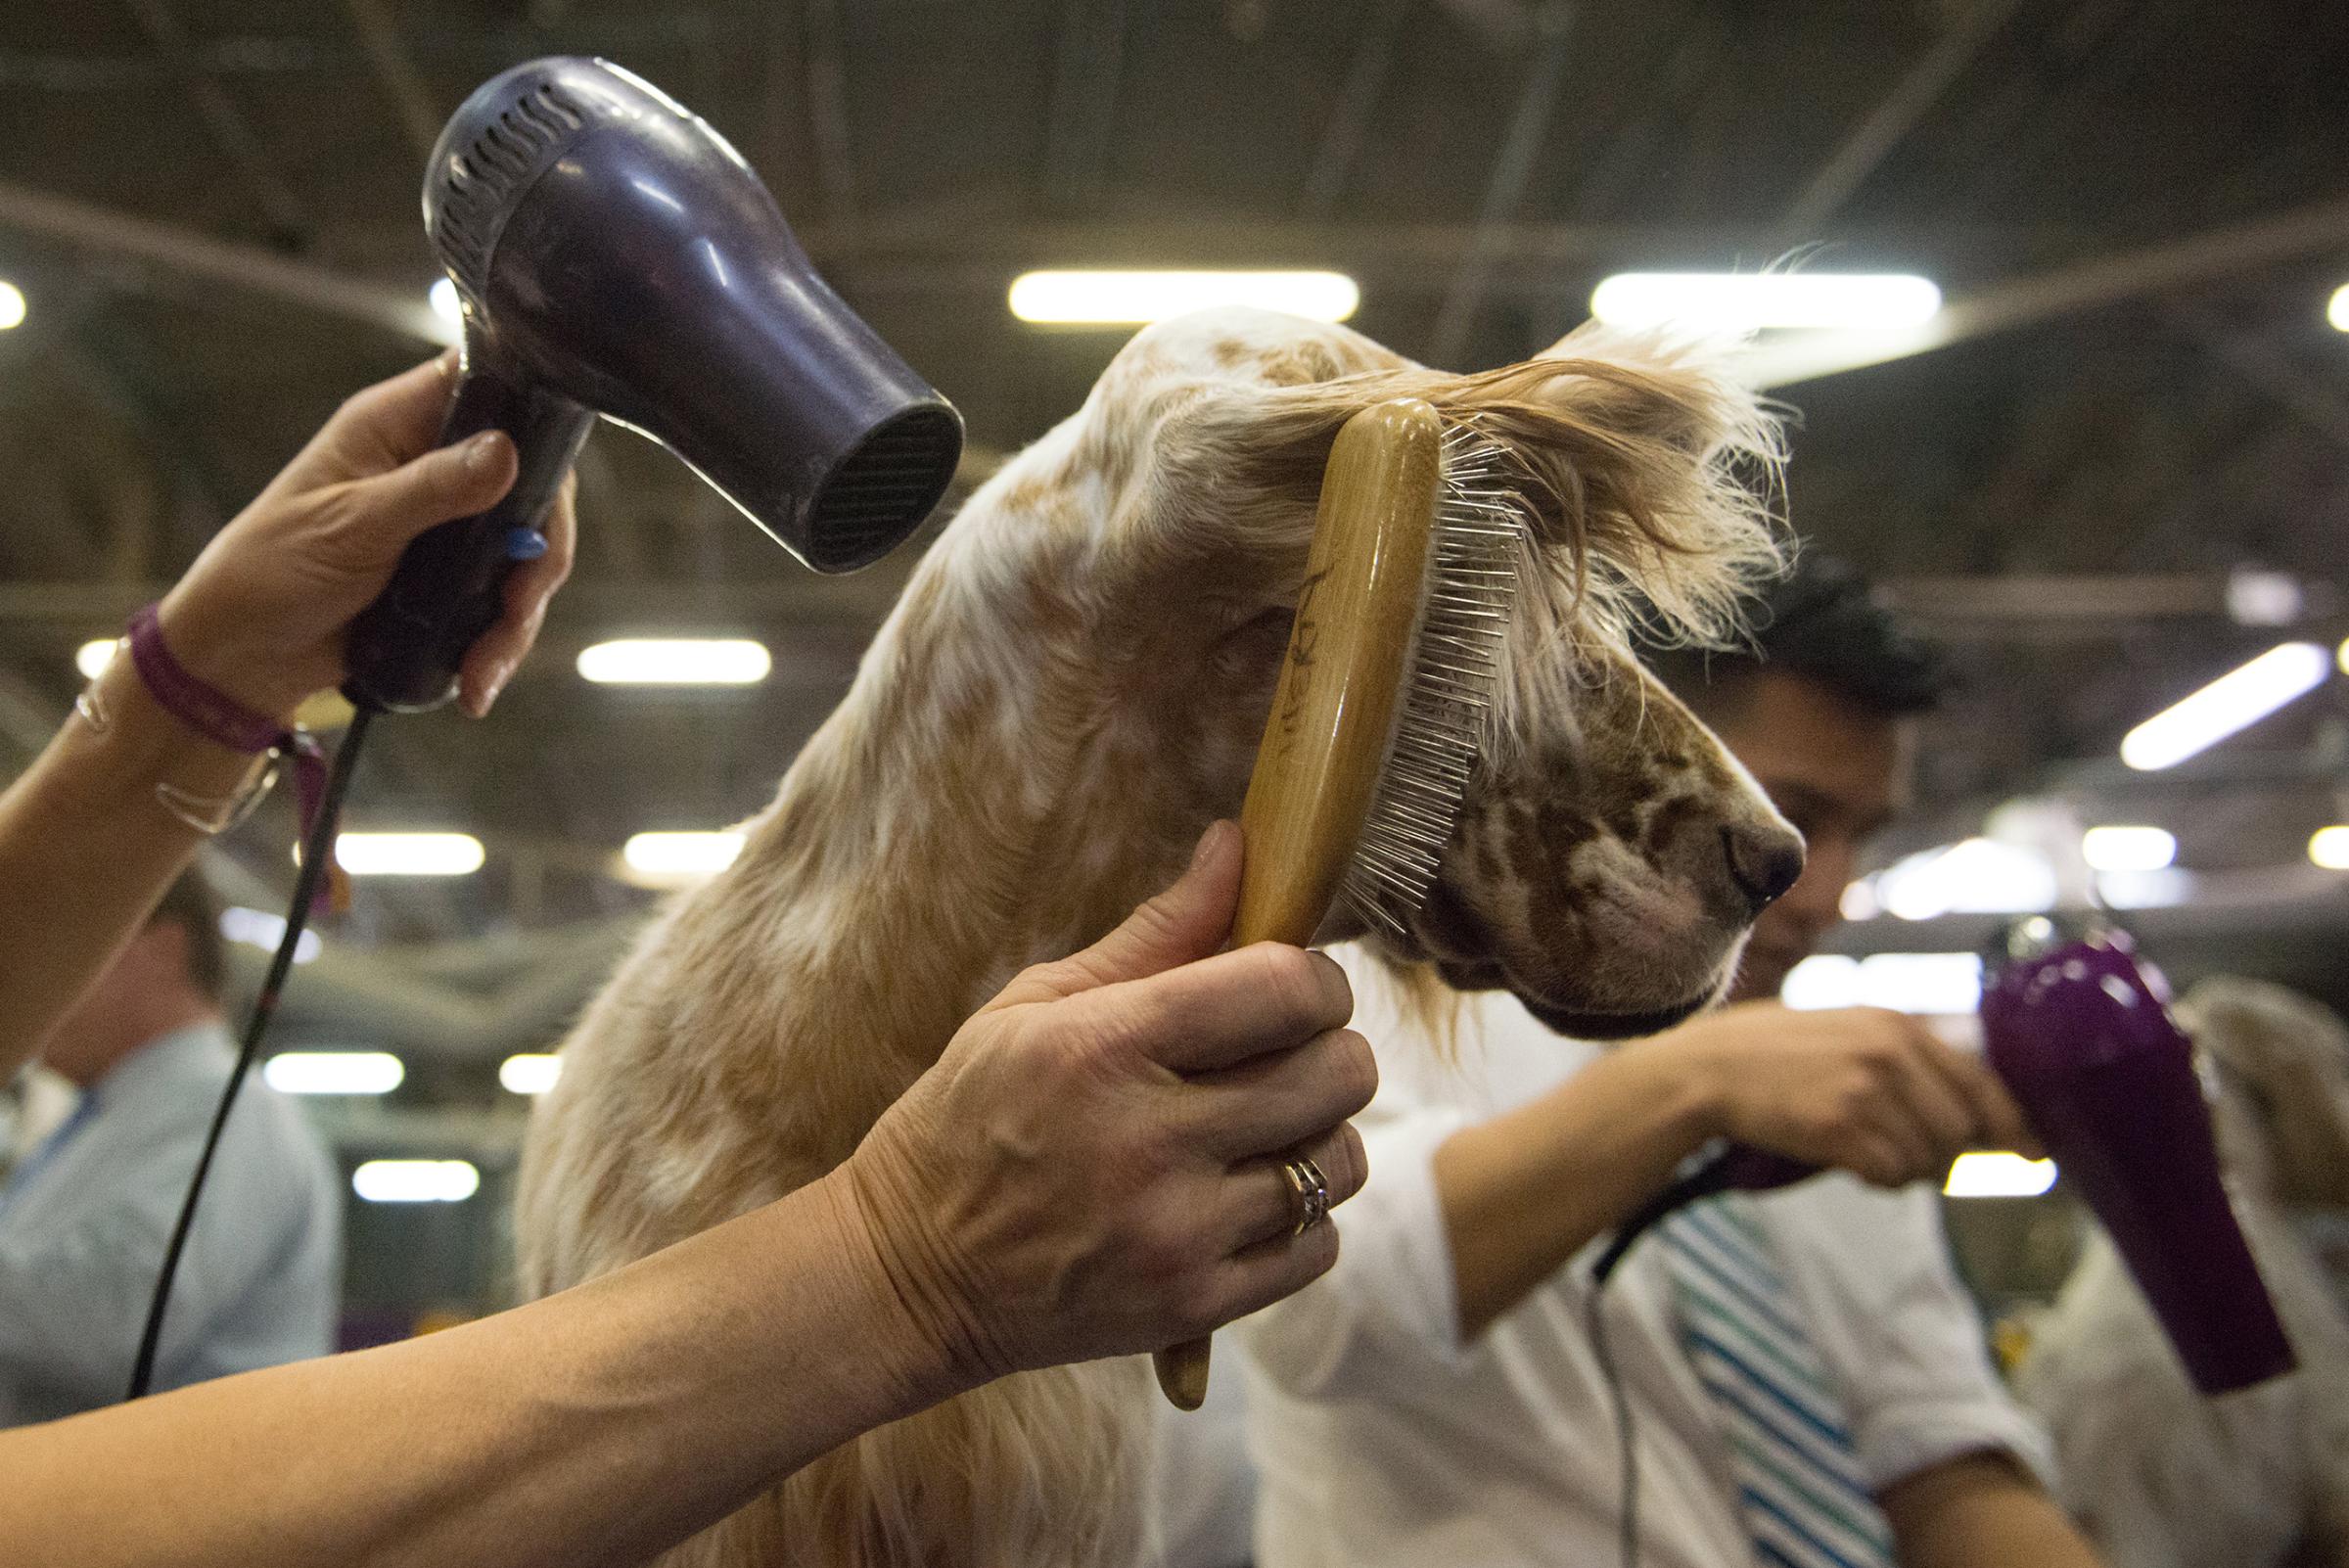 An American Cocker Spaniel gets its fur blown by a hair dryer in the grooming area on the second day of the 140th annual Westminster Kennel Club dog show in New York City on Feb. 16, 2016.